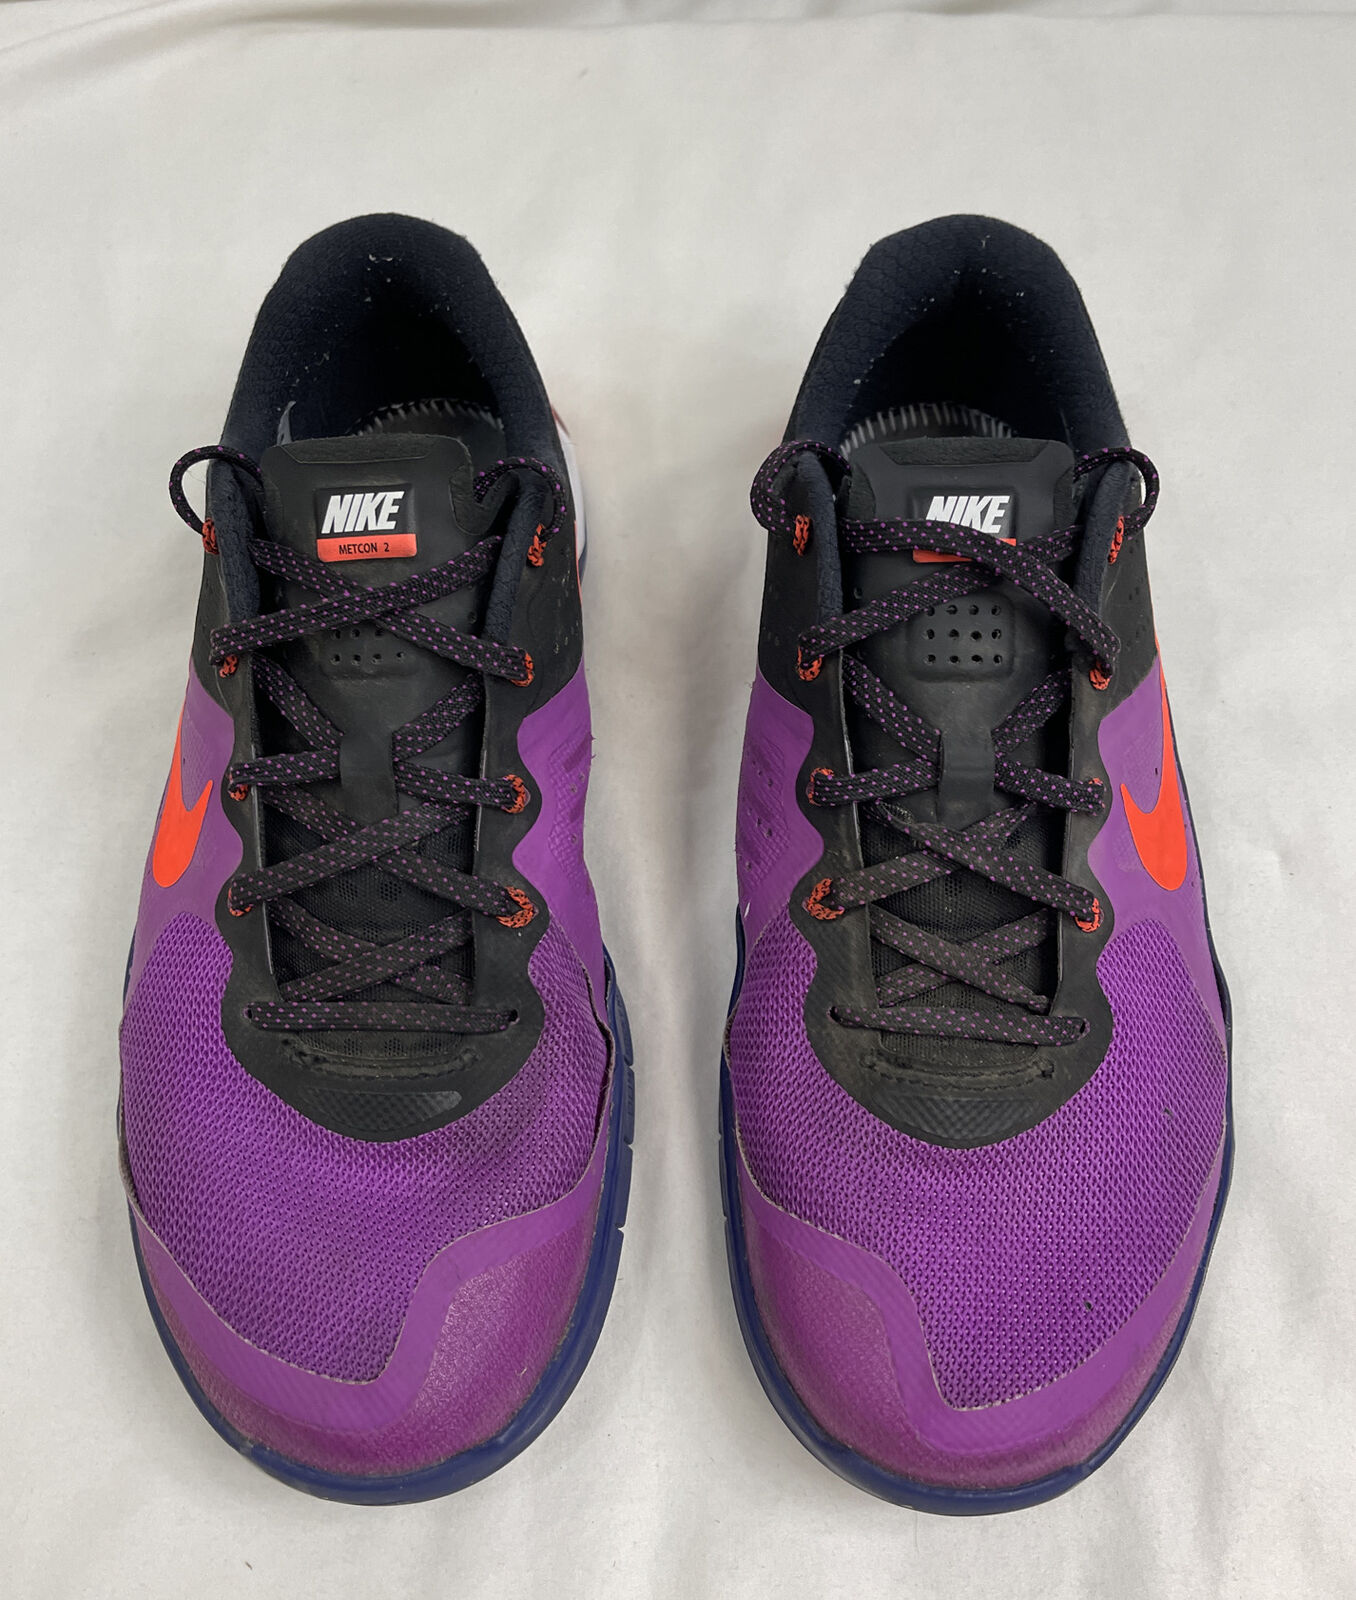 Nike Metcon - US Men's size 7.5 - used in good condition - Purple-NO SHOE INSERT